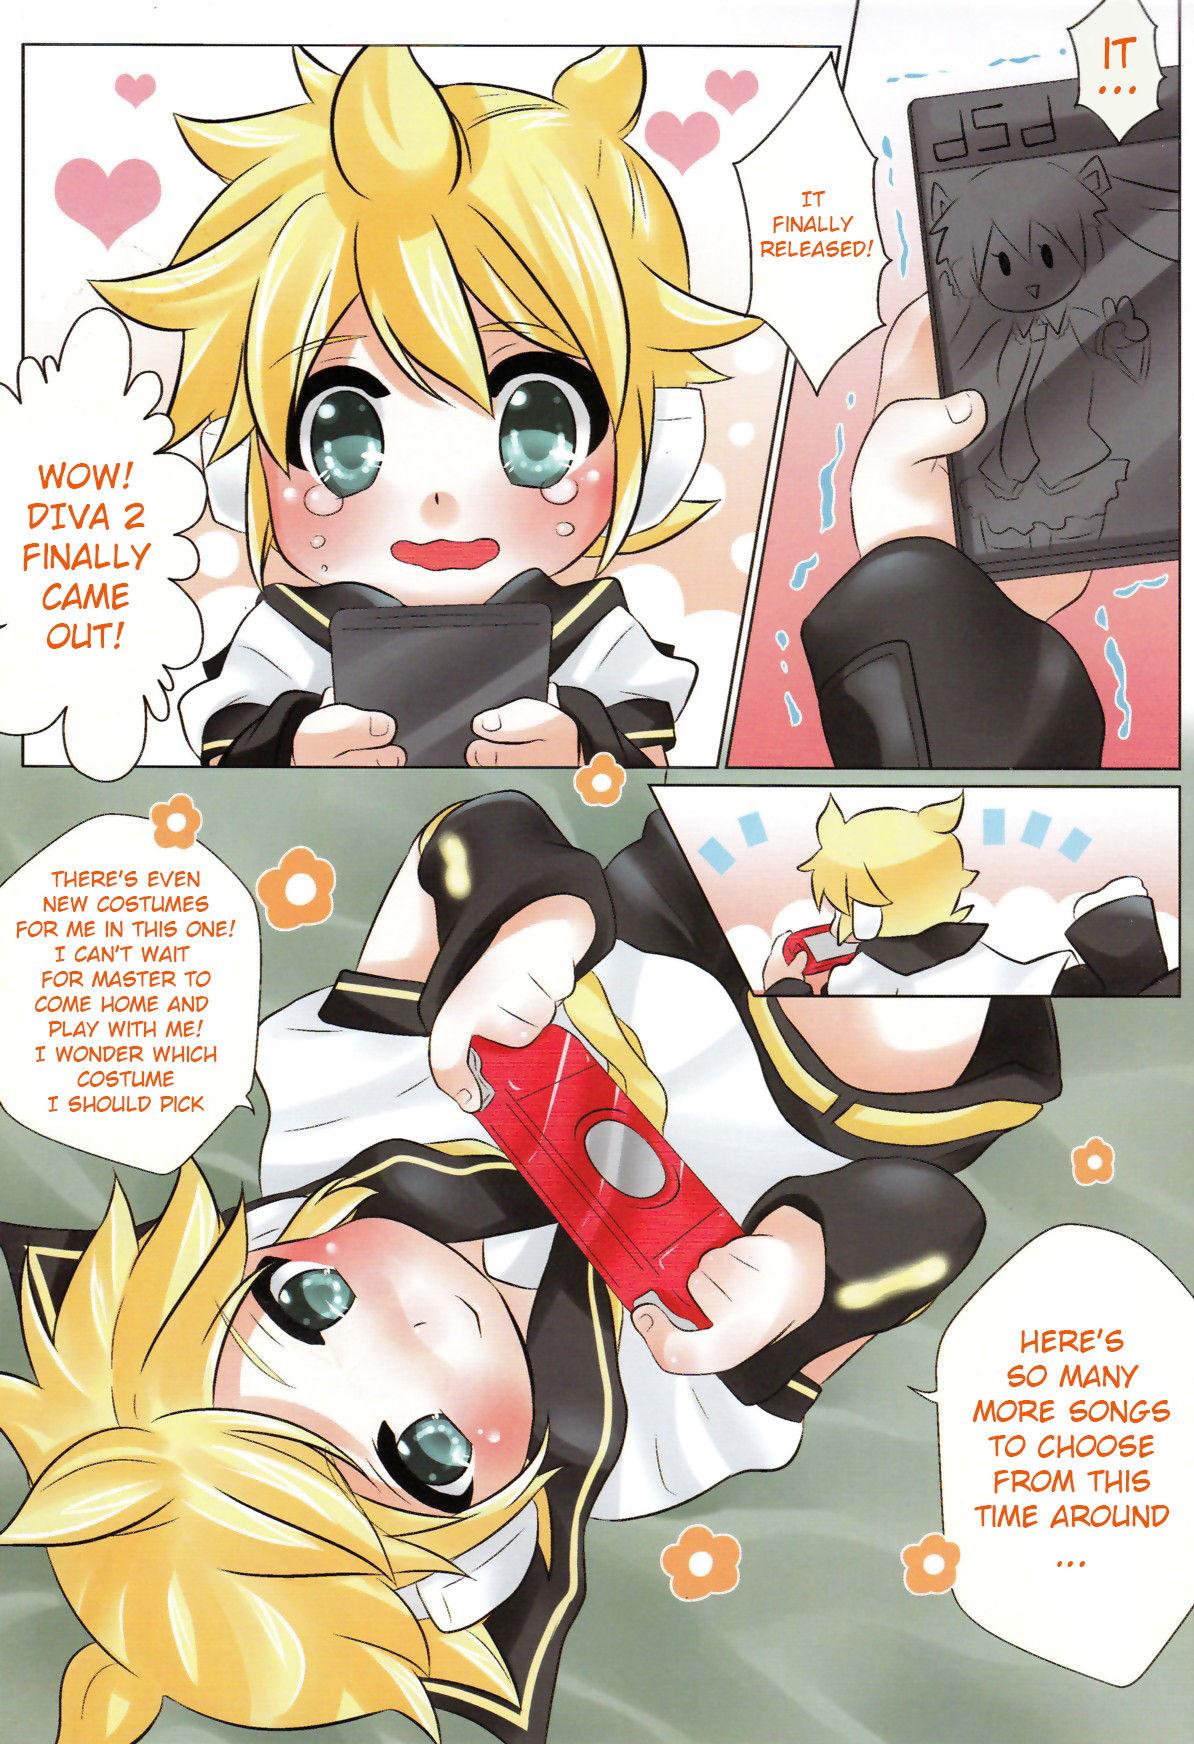 Tall Project Len-kyun 2 - Vocaloid Hairy Sexy - Page 3